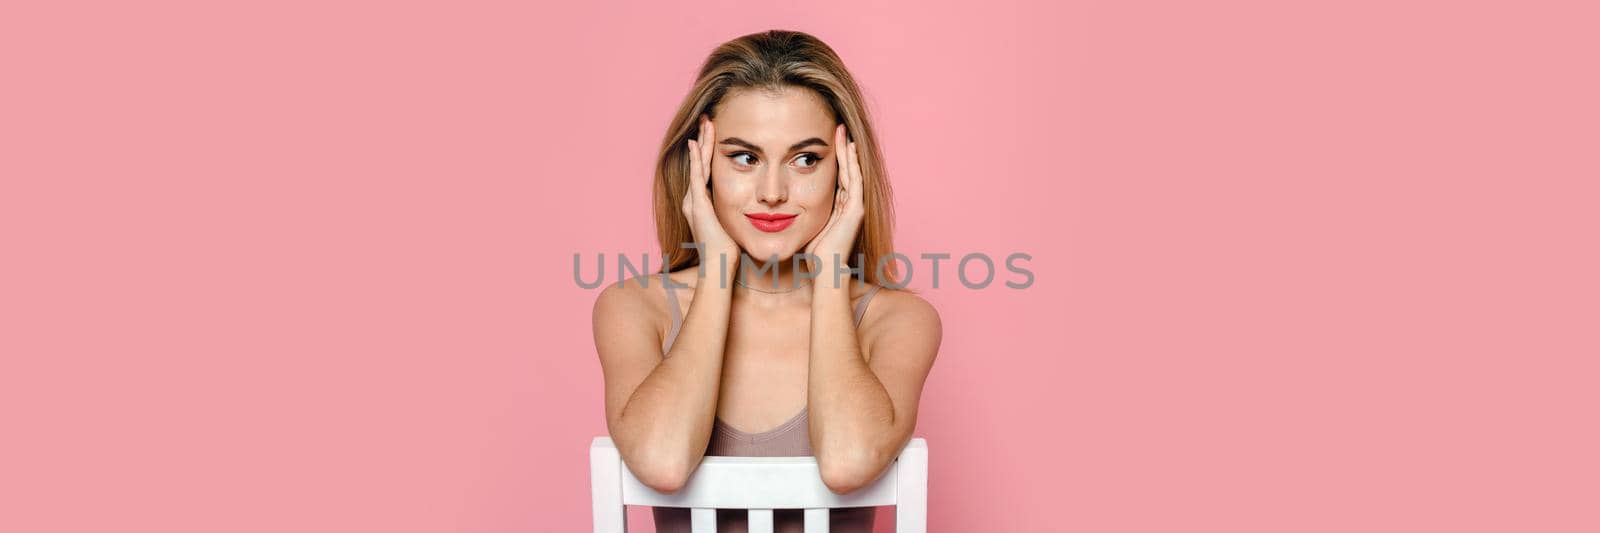 Casual beauty concept of pretty young woman on pink background. Web banner.